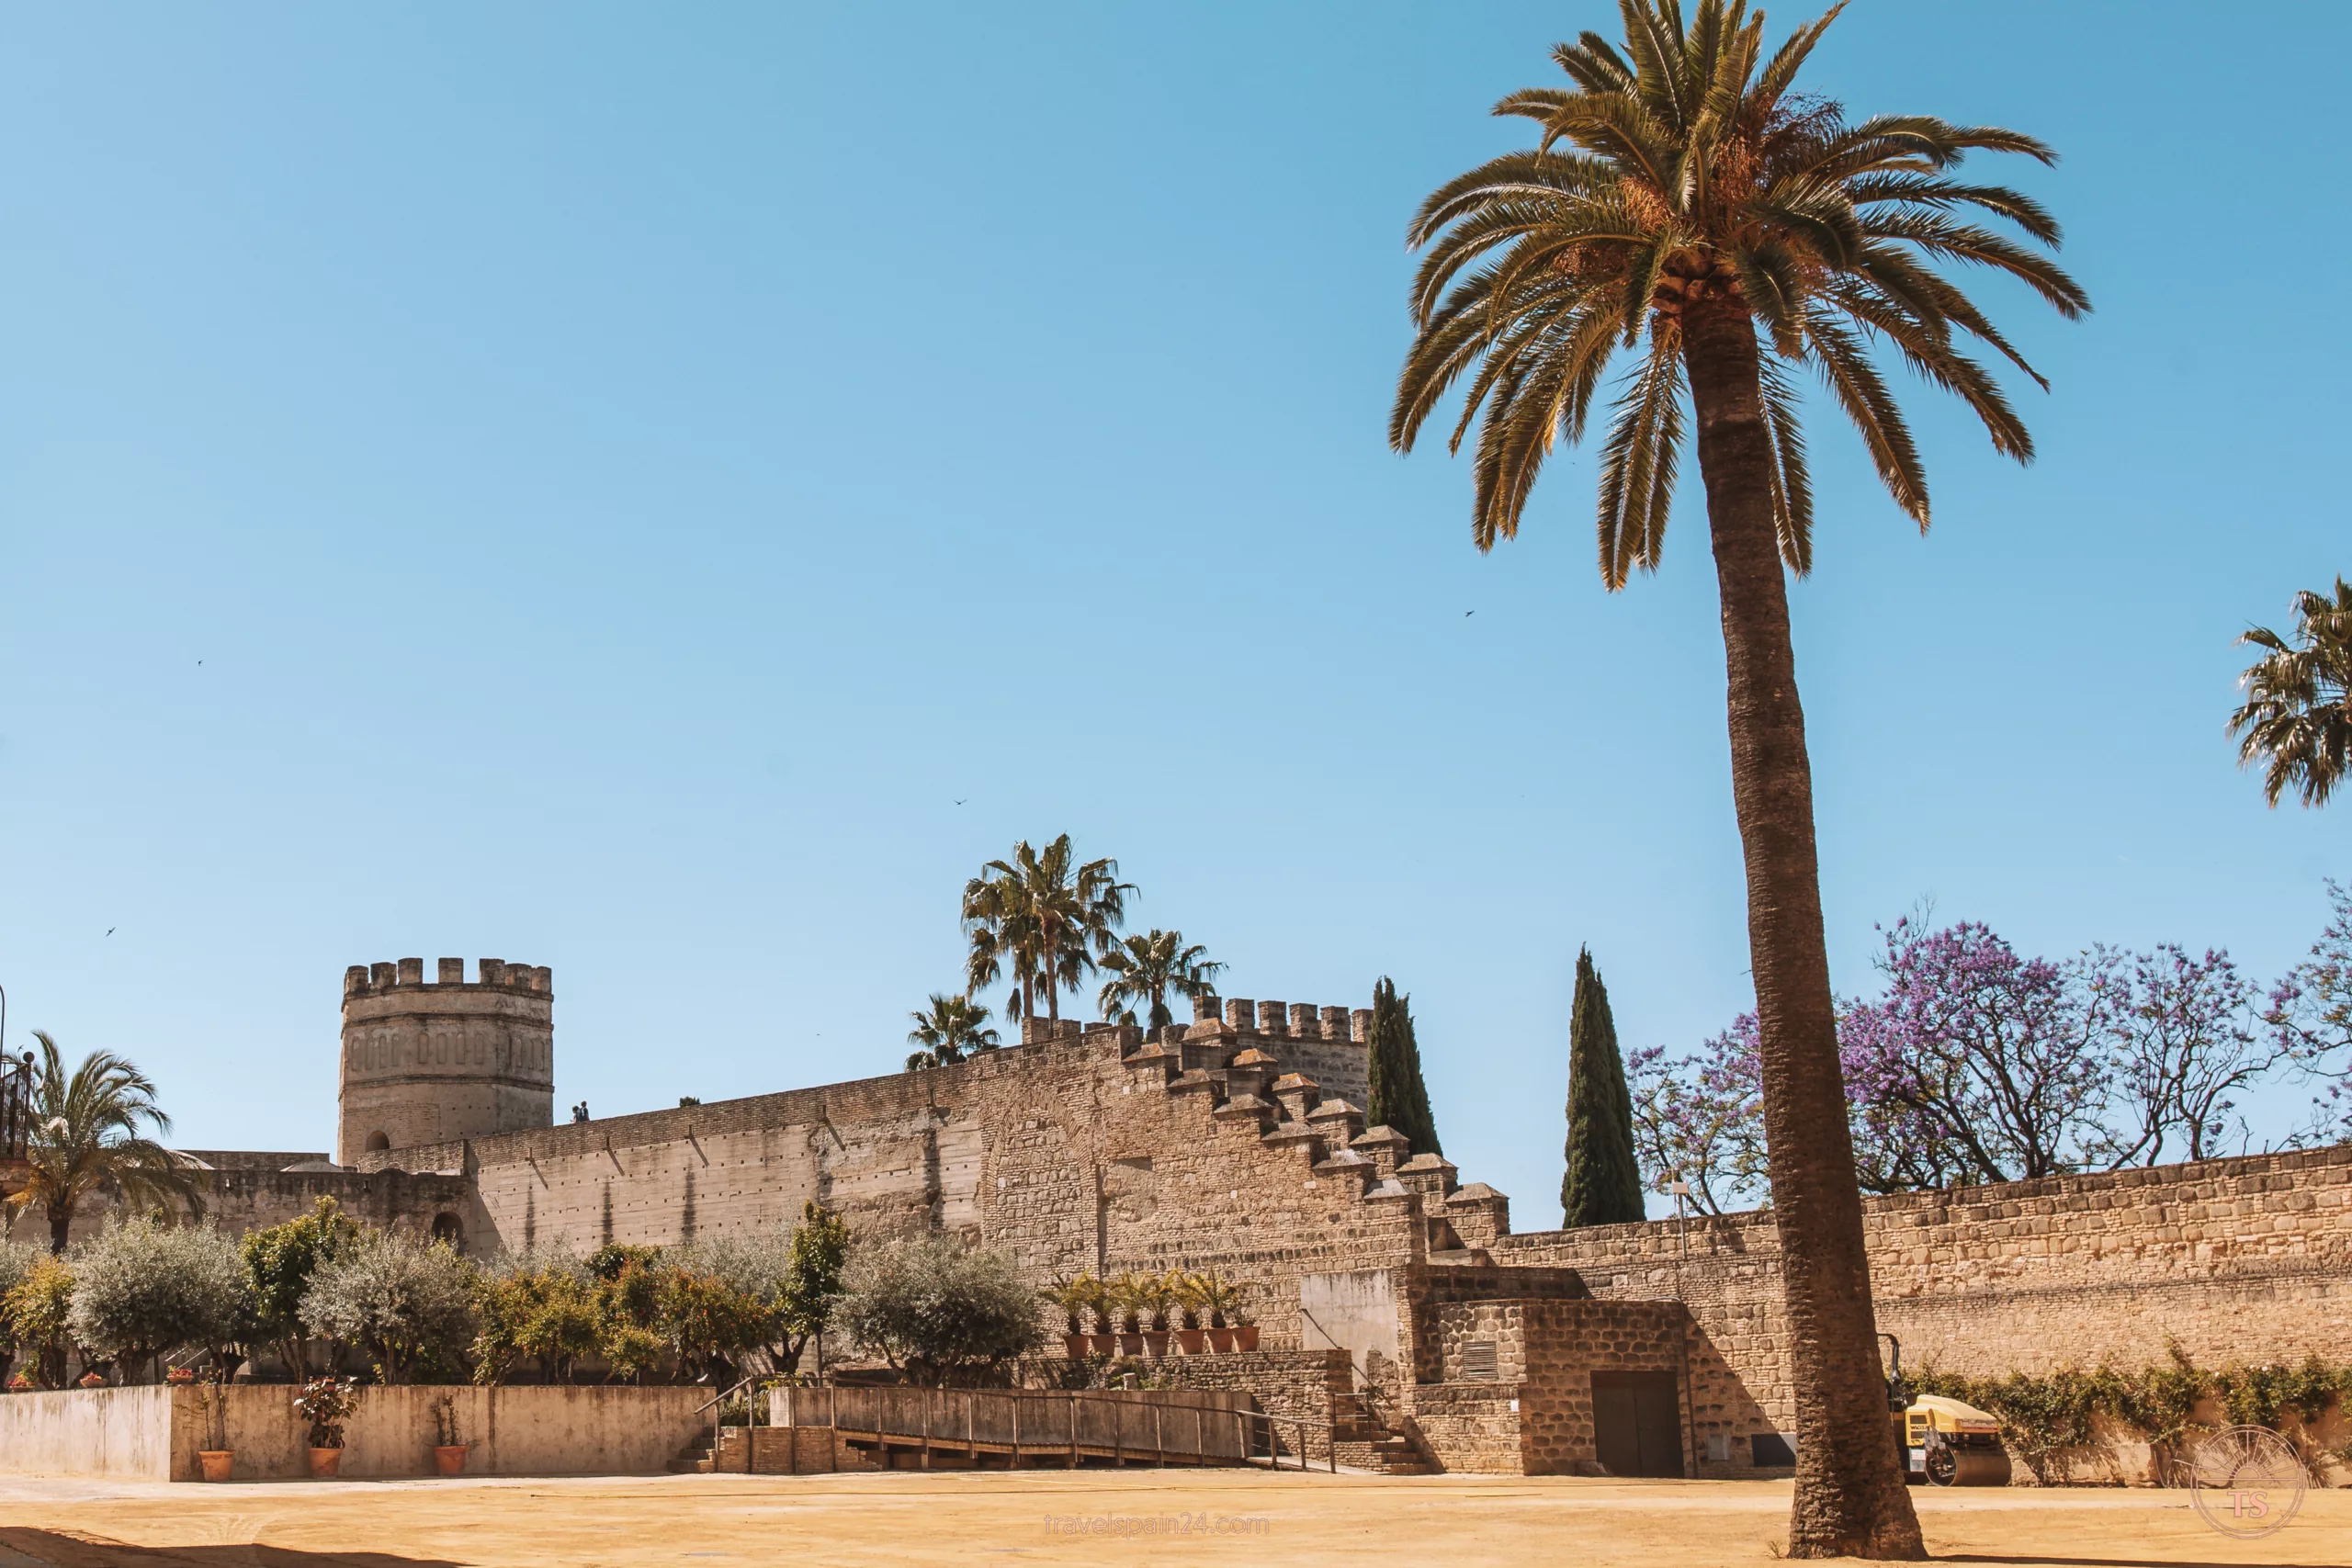 Front view of the Alcazar in Jerez de la Frontera, showing the tower, walls, and part of the garden on a sunny morning. This image highlights the historical significance of the Alcazar in Jerez.